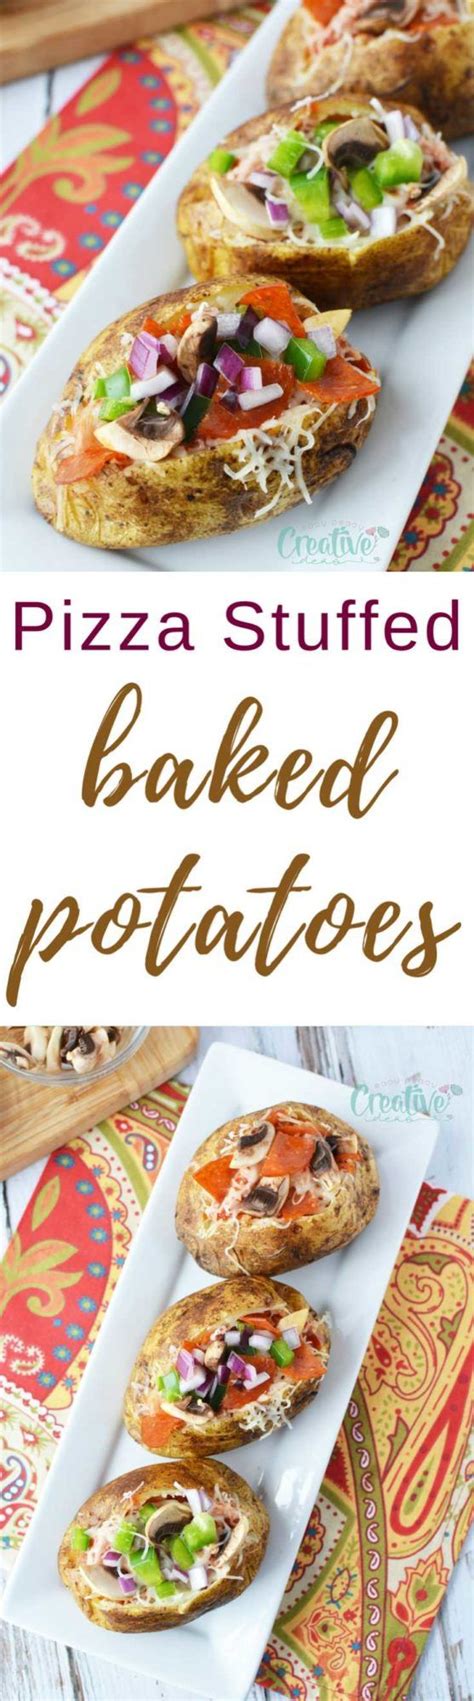 Pizza Stuffed Baked Potatoes Perfect For Any Gatherings Parties Or